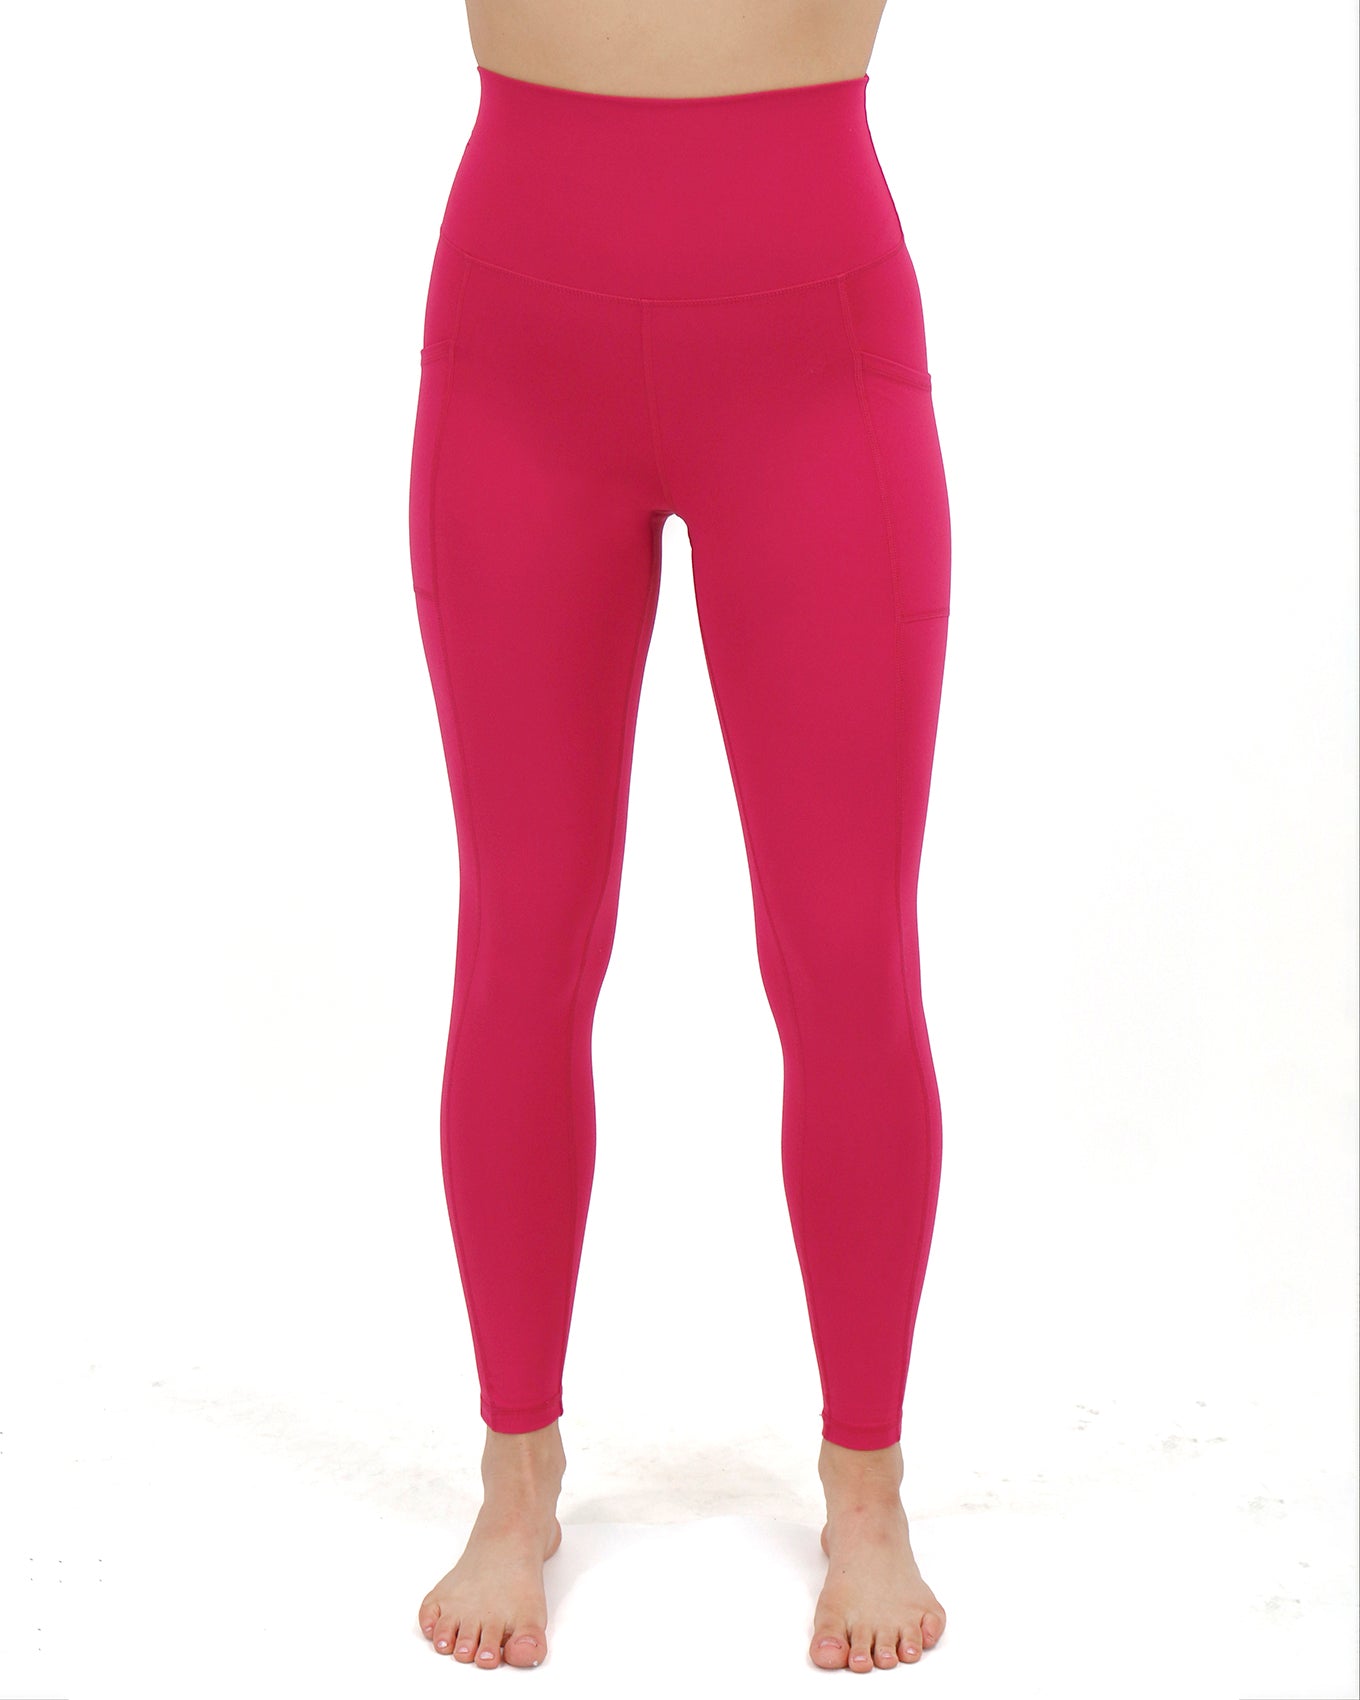 90 Degree By Reflex, Pants & Jumpsuits, 9 Degree By Reflex High Rise  Pocket Leggings Size Xs